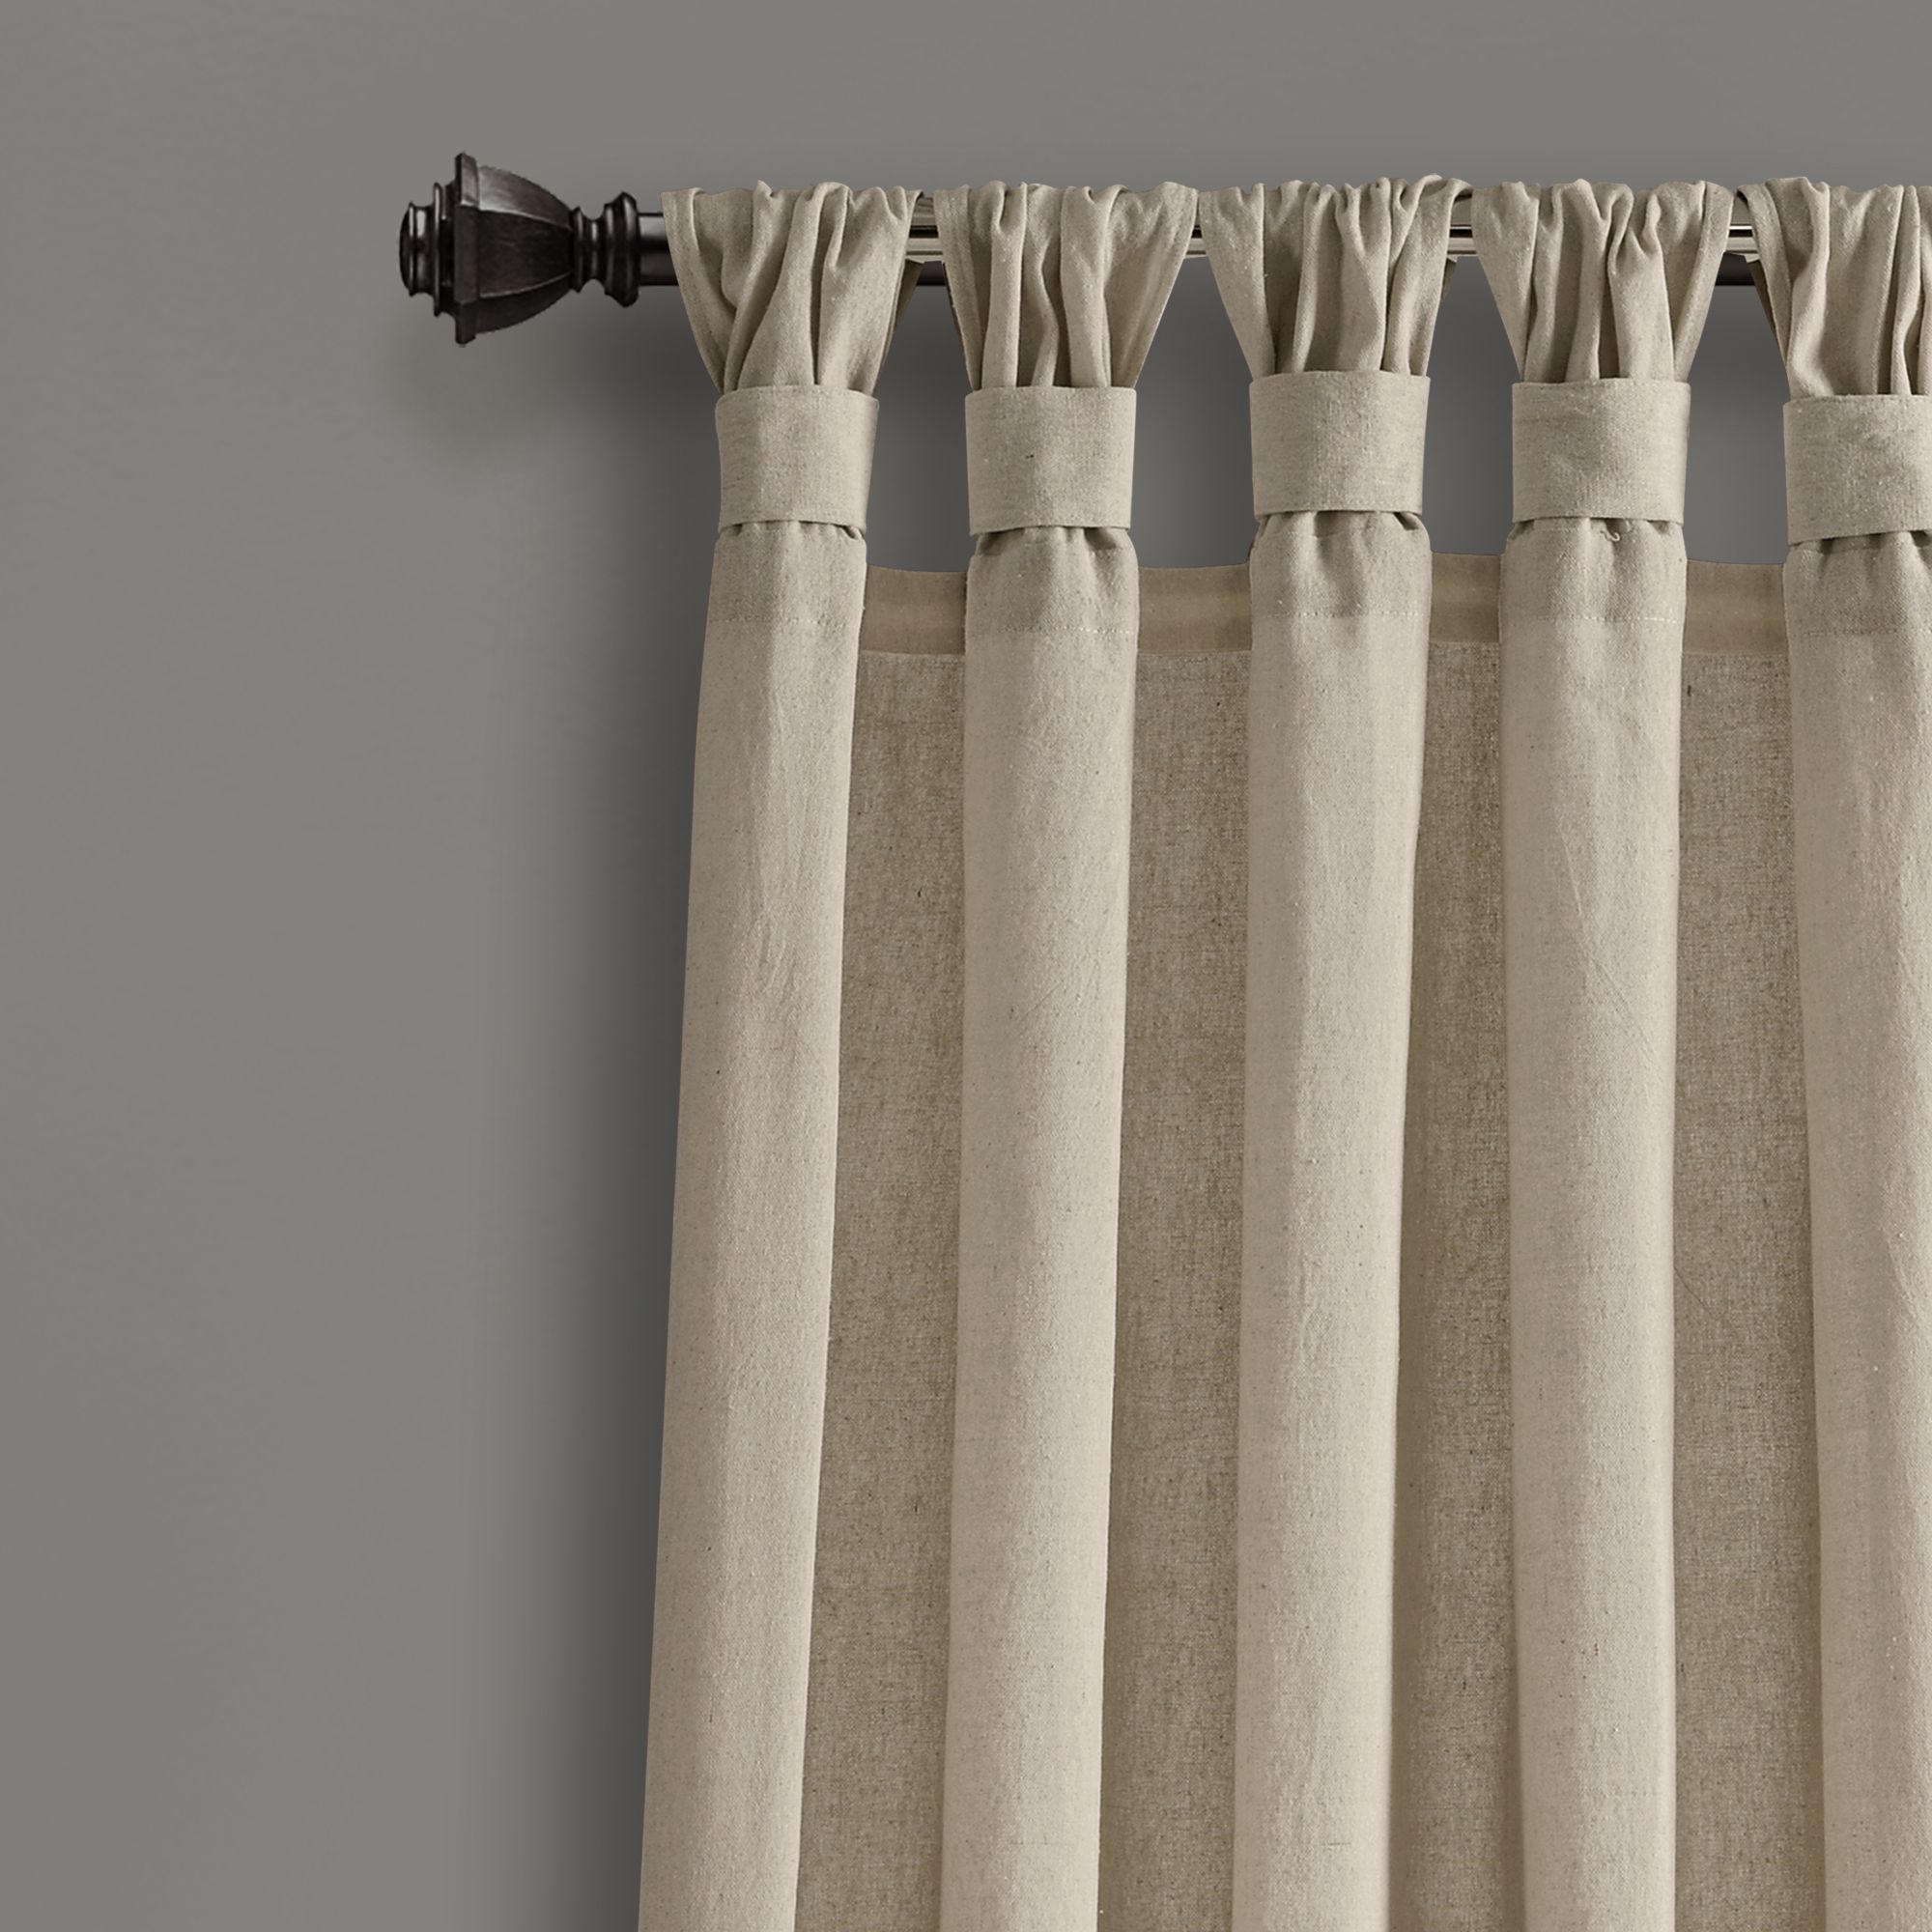 Well Liked Knotted Tab Top Window Curtain Panel Pairs Regarding Details About Burlap Knotted Tab Top Window Curtain Panels Dark Linen Pair  45x84 Set (View 3 of 20)